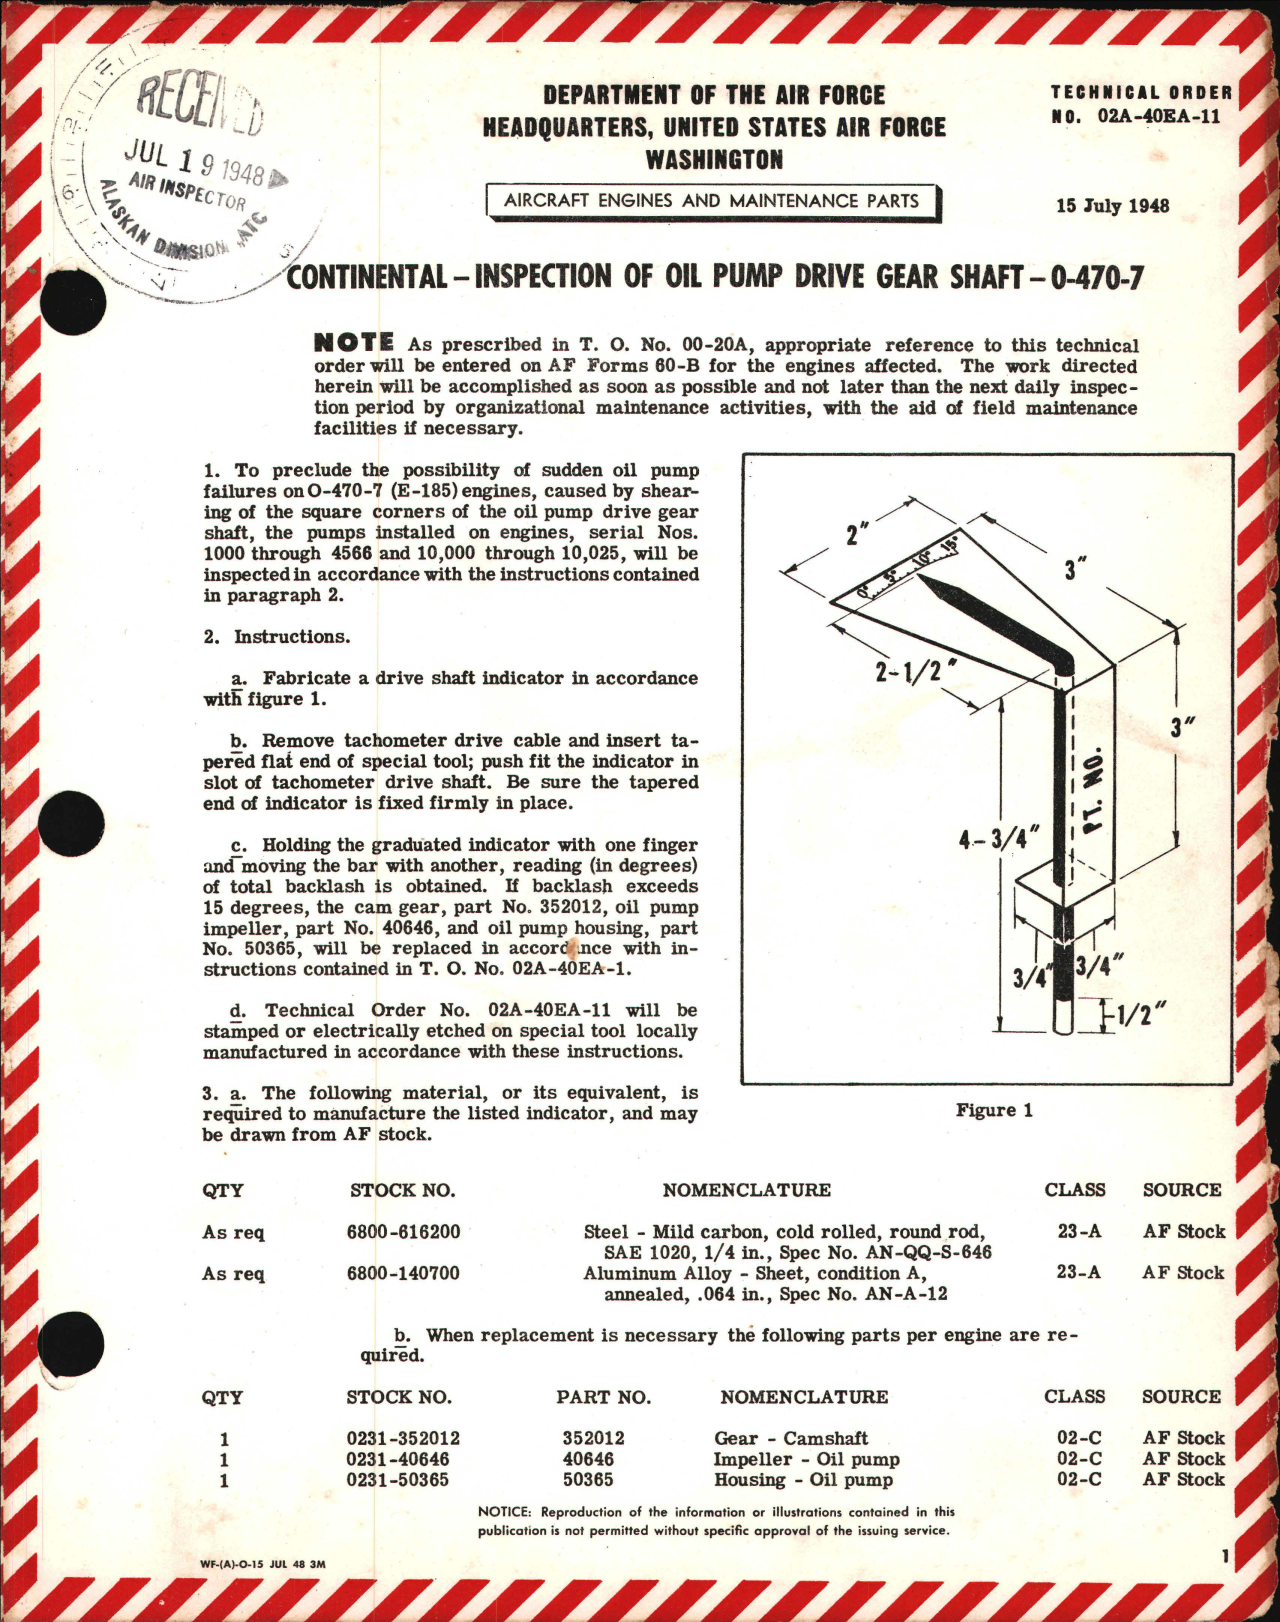 Sample page 1 from AirCorps Library document: Inspection of Oil Pump Drive Gear Shaft for O-470-7